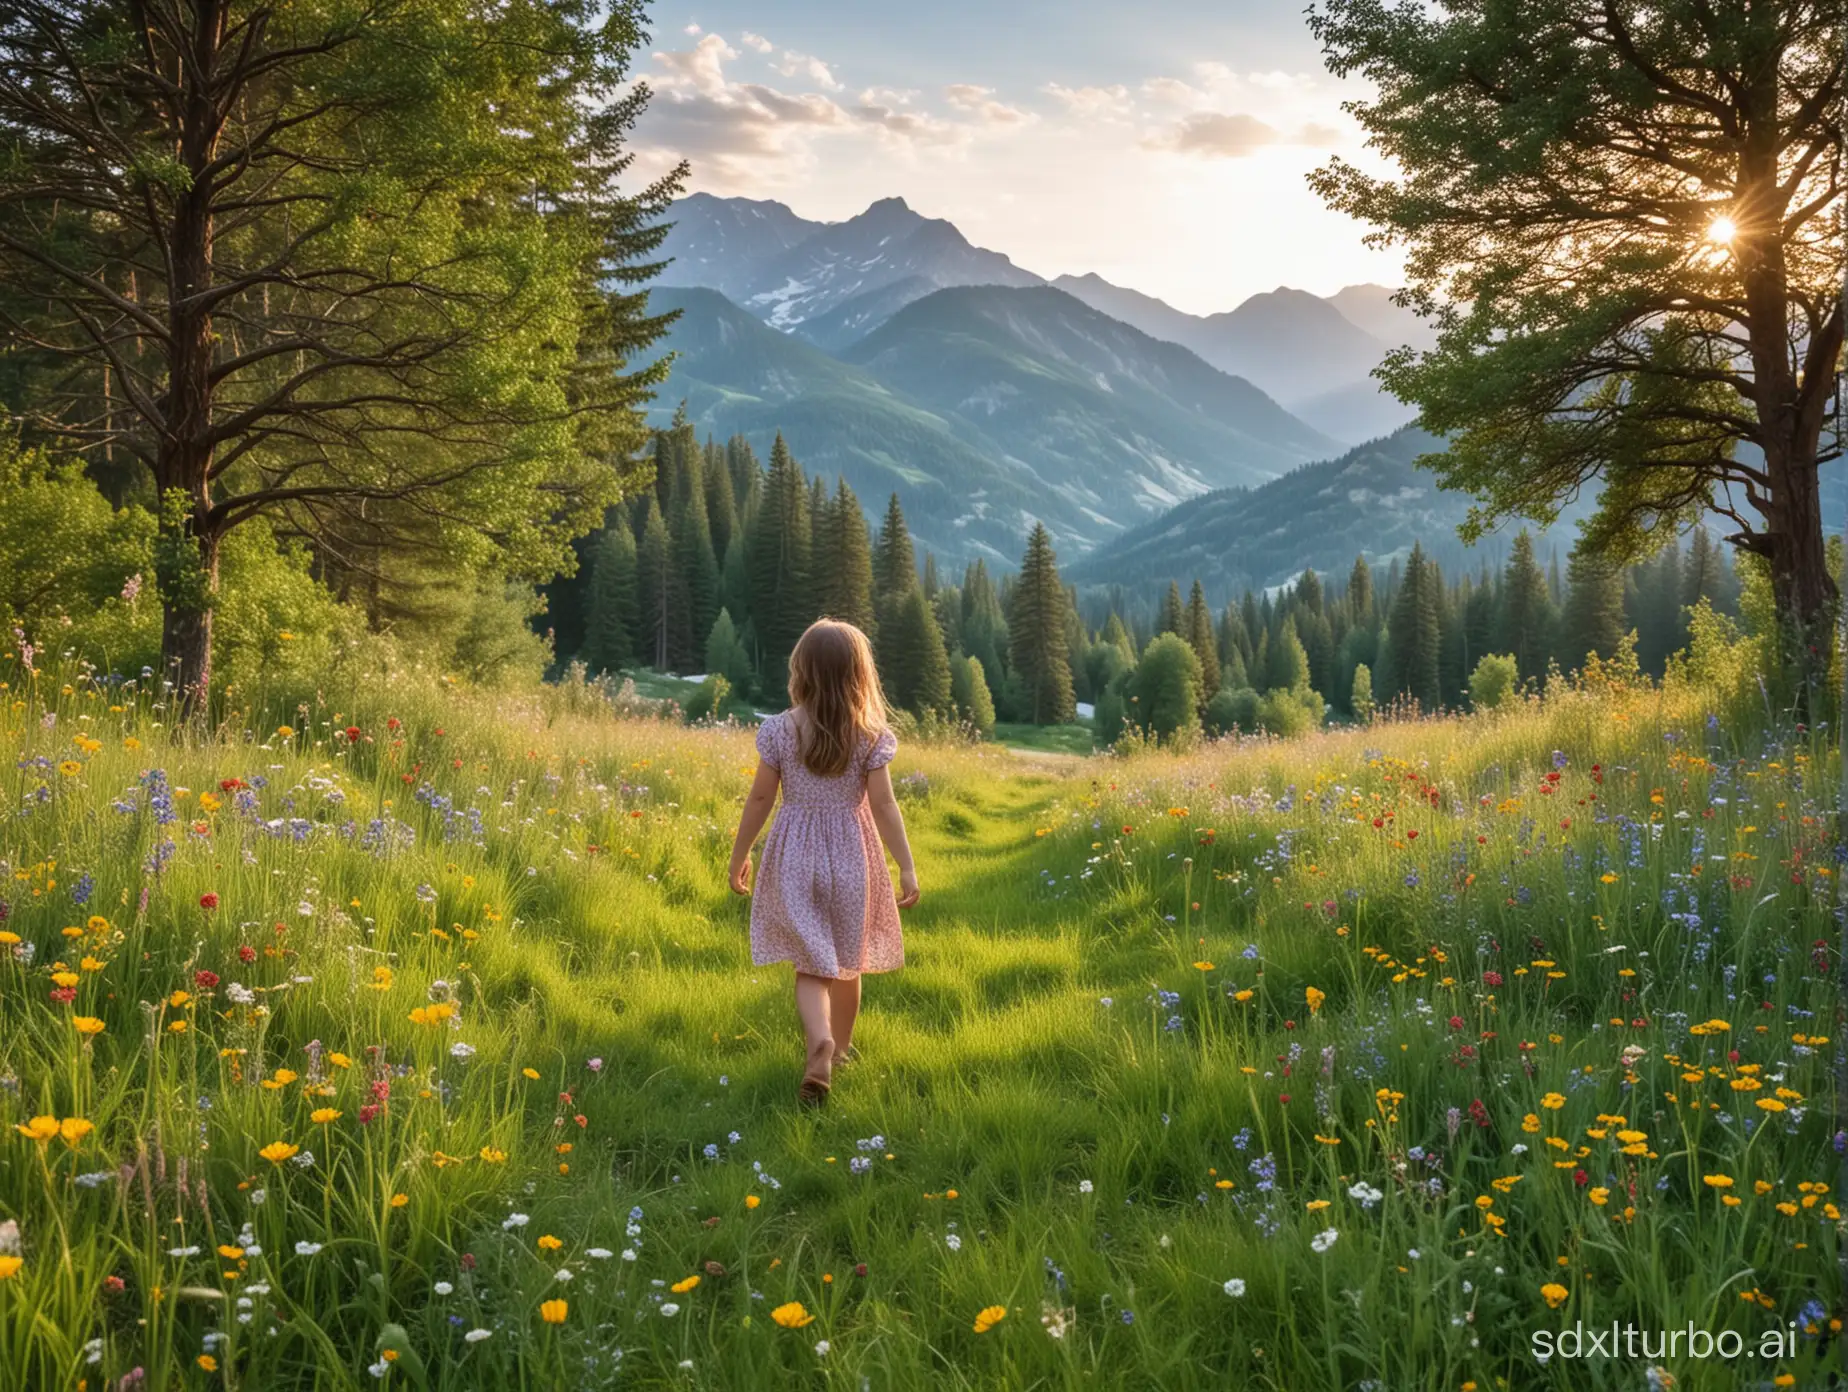 The pretty little girl walks on the grass, surrounded by wildflowers, with mountains in the distance and big trees behind.